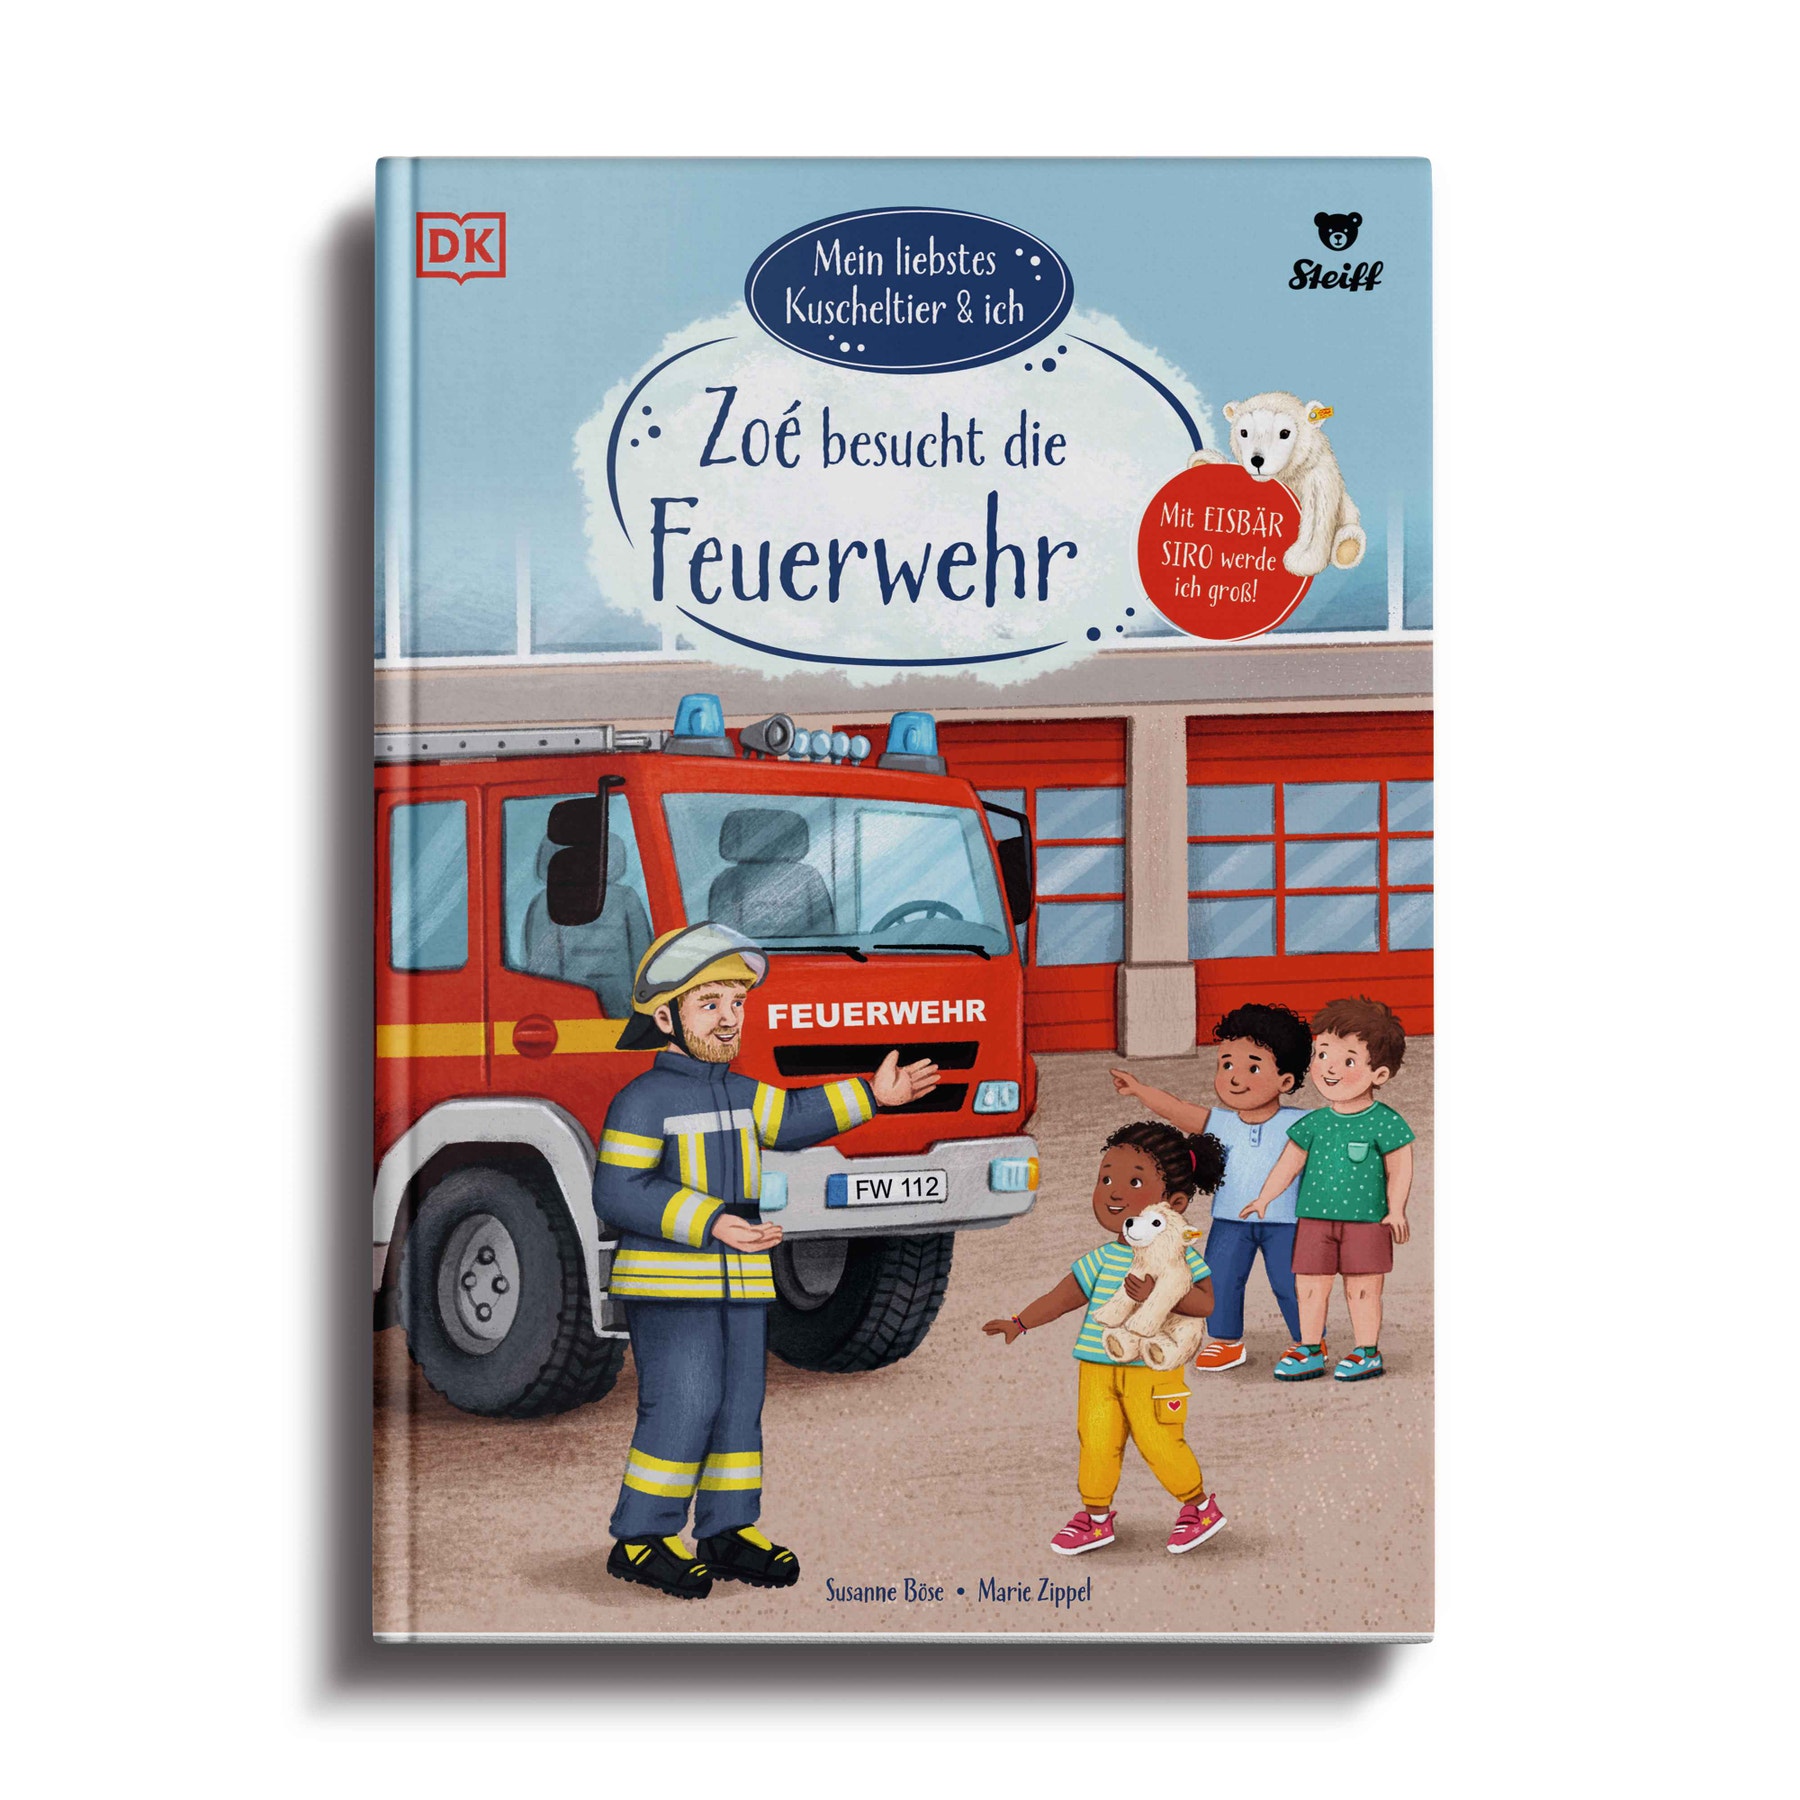 My favourite cuddly toy and me: Zoé visits the fire station reading book